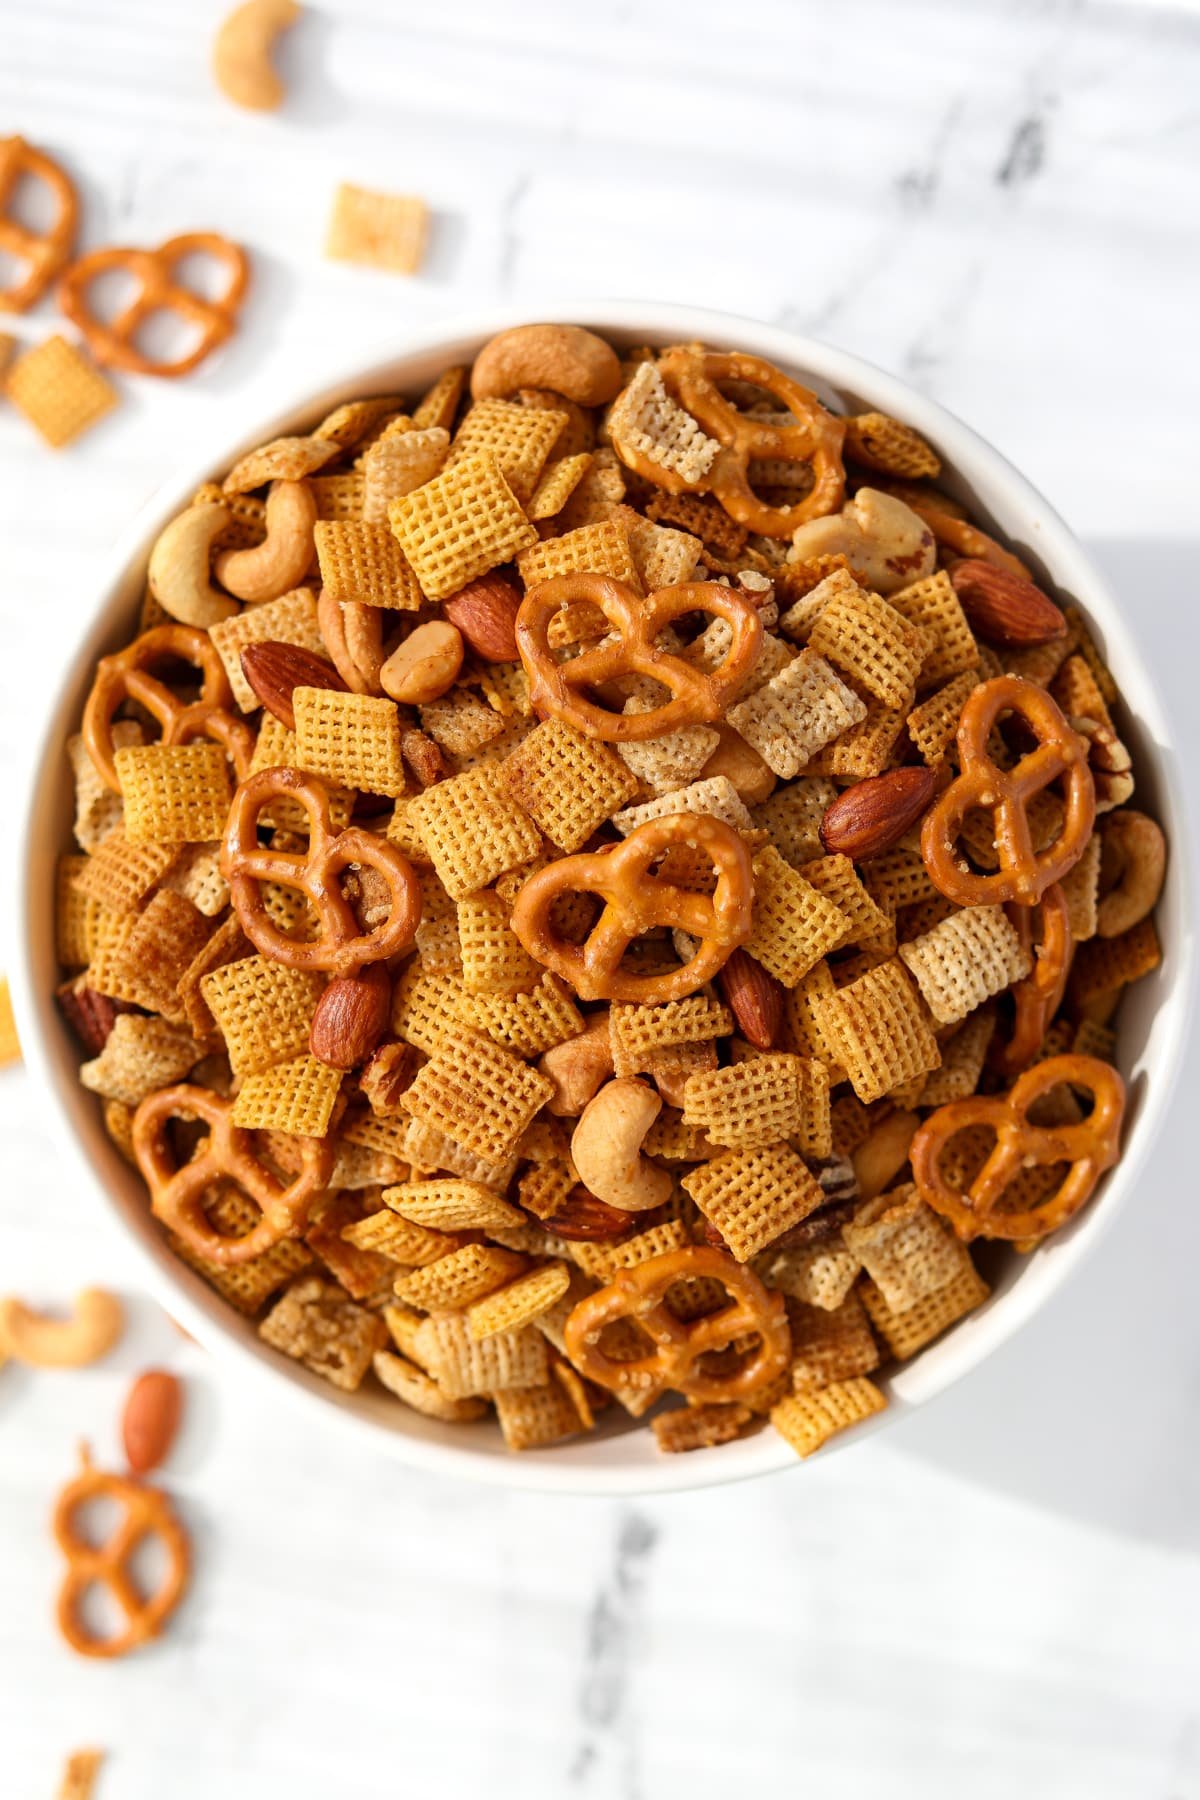 A large bowl filled with gluten free Chex Mix.